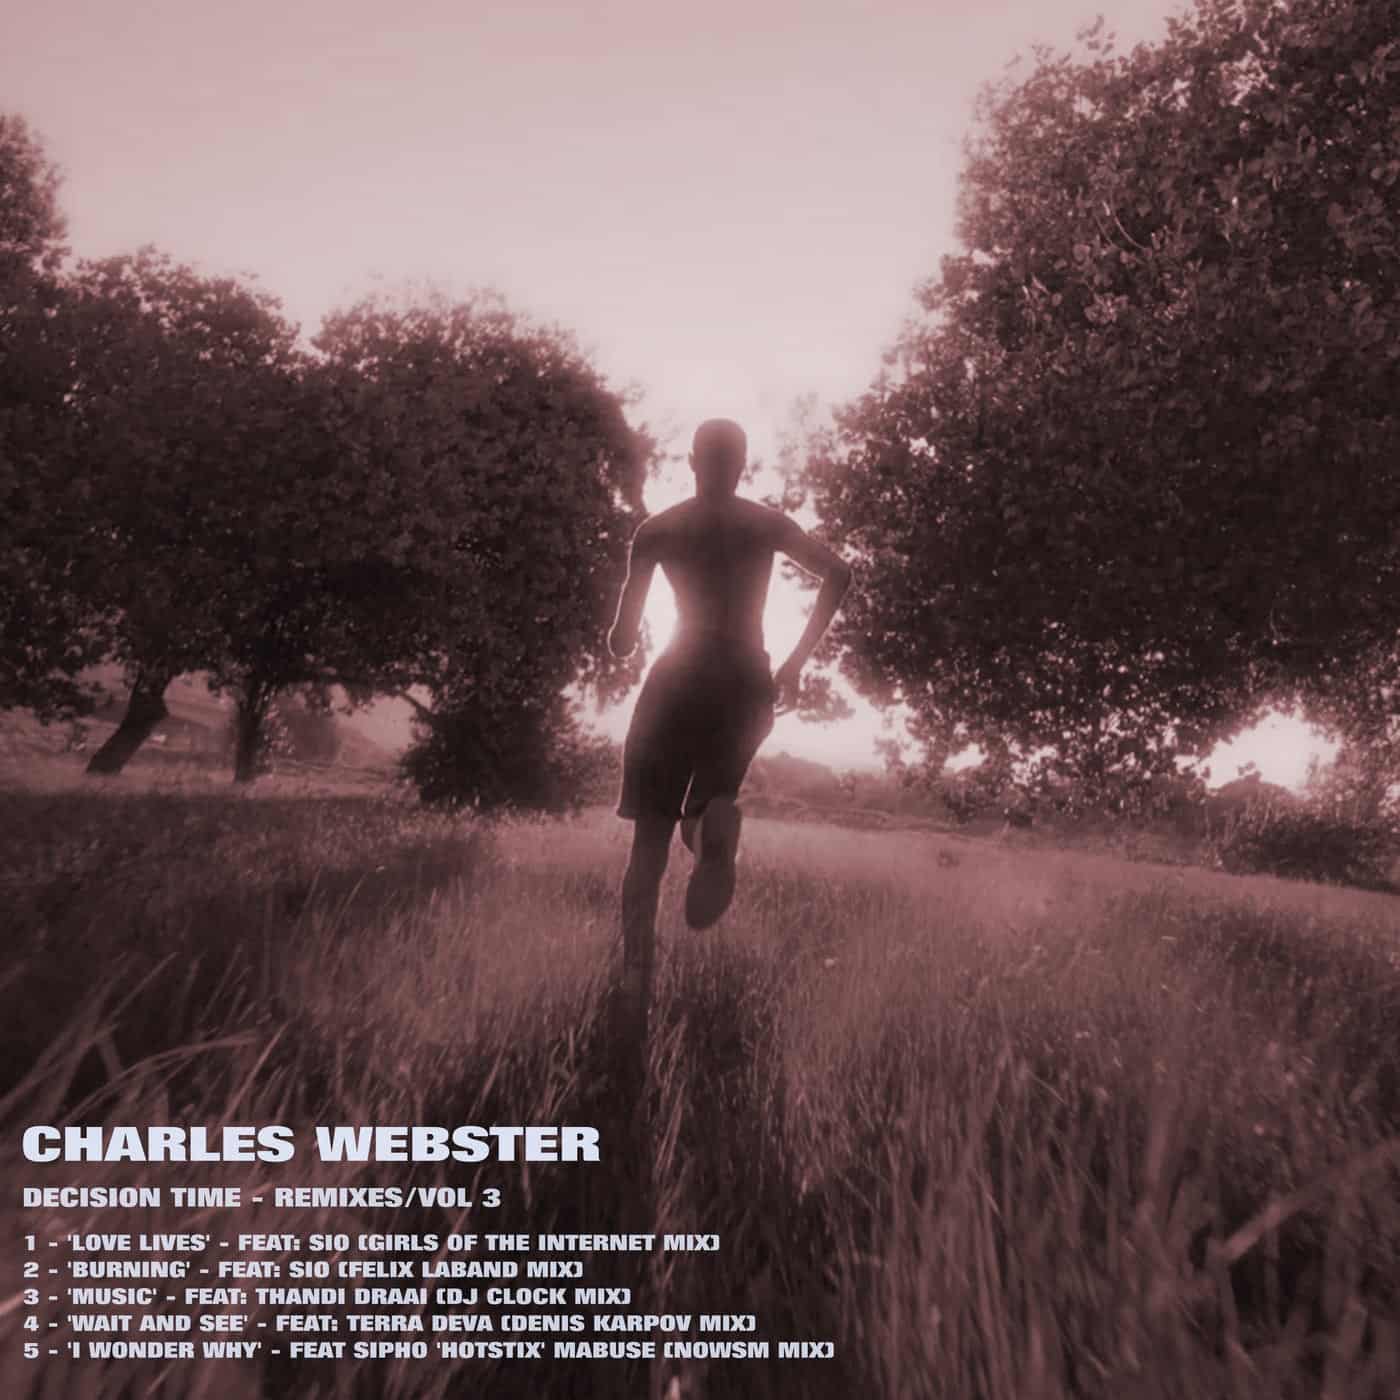 Download Charles Webster - Decision Time Remixes Vol.3 on Electrobuzz